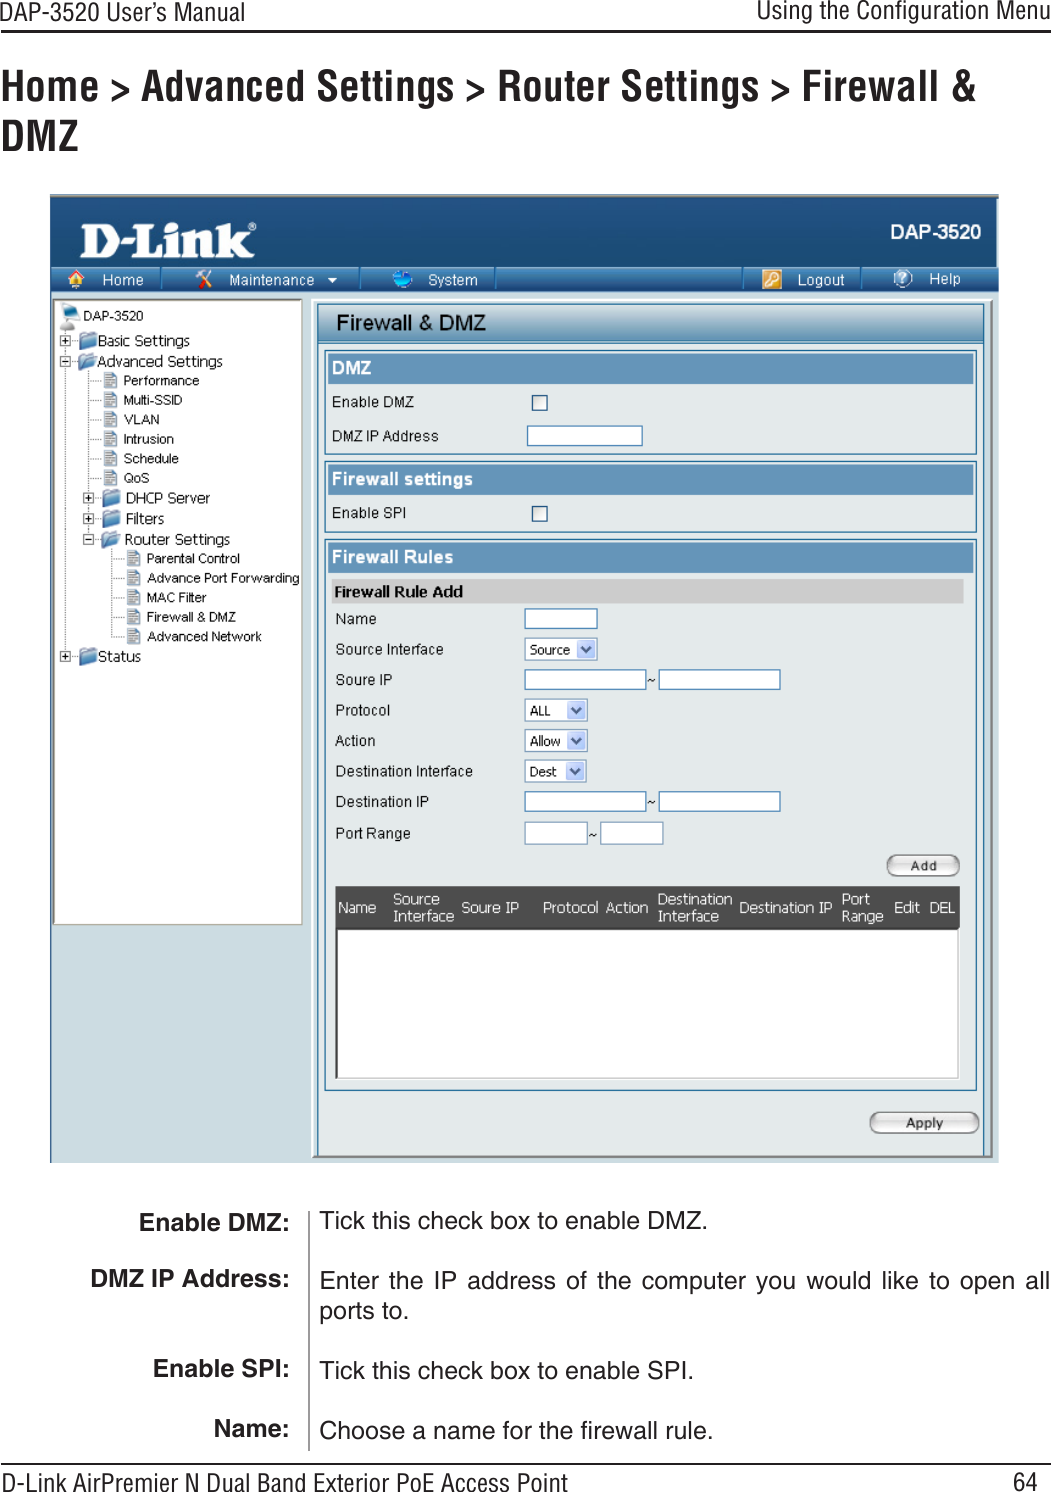 64DAP-3520 User’s Manual D-Link AirPremier N Dual Band Exterior PoE Access PointUsing the Conﬁguration MenuHome &gt; Advanced Settings &gt; Router Settings &gt; Firewall &amp; DMZEnable DMZ: DMZ IP Address:Enable SPI:Name:Tick this check box to enable DMZ.Enter  the  IP  address  of  the  computer  you  would  like  to  open all ports to.Tick this check box to enable SPI.Choose a name for the rewall rule.